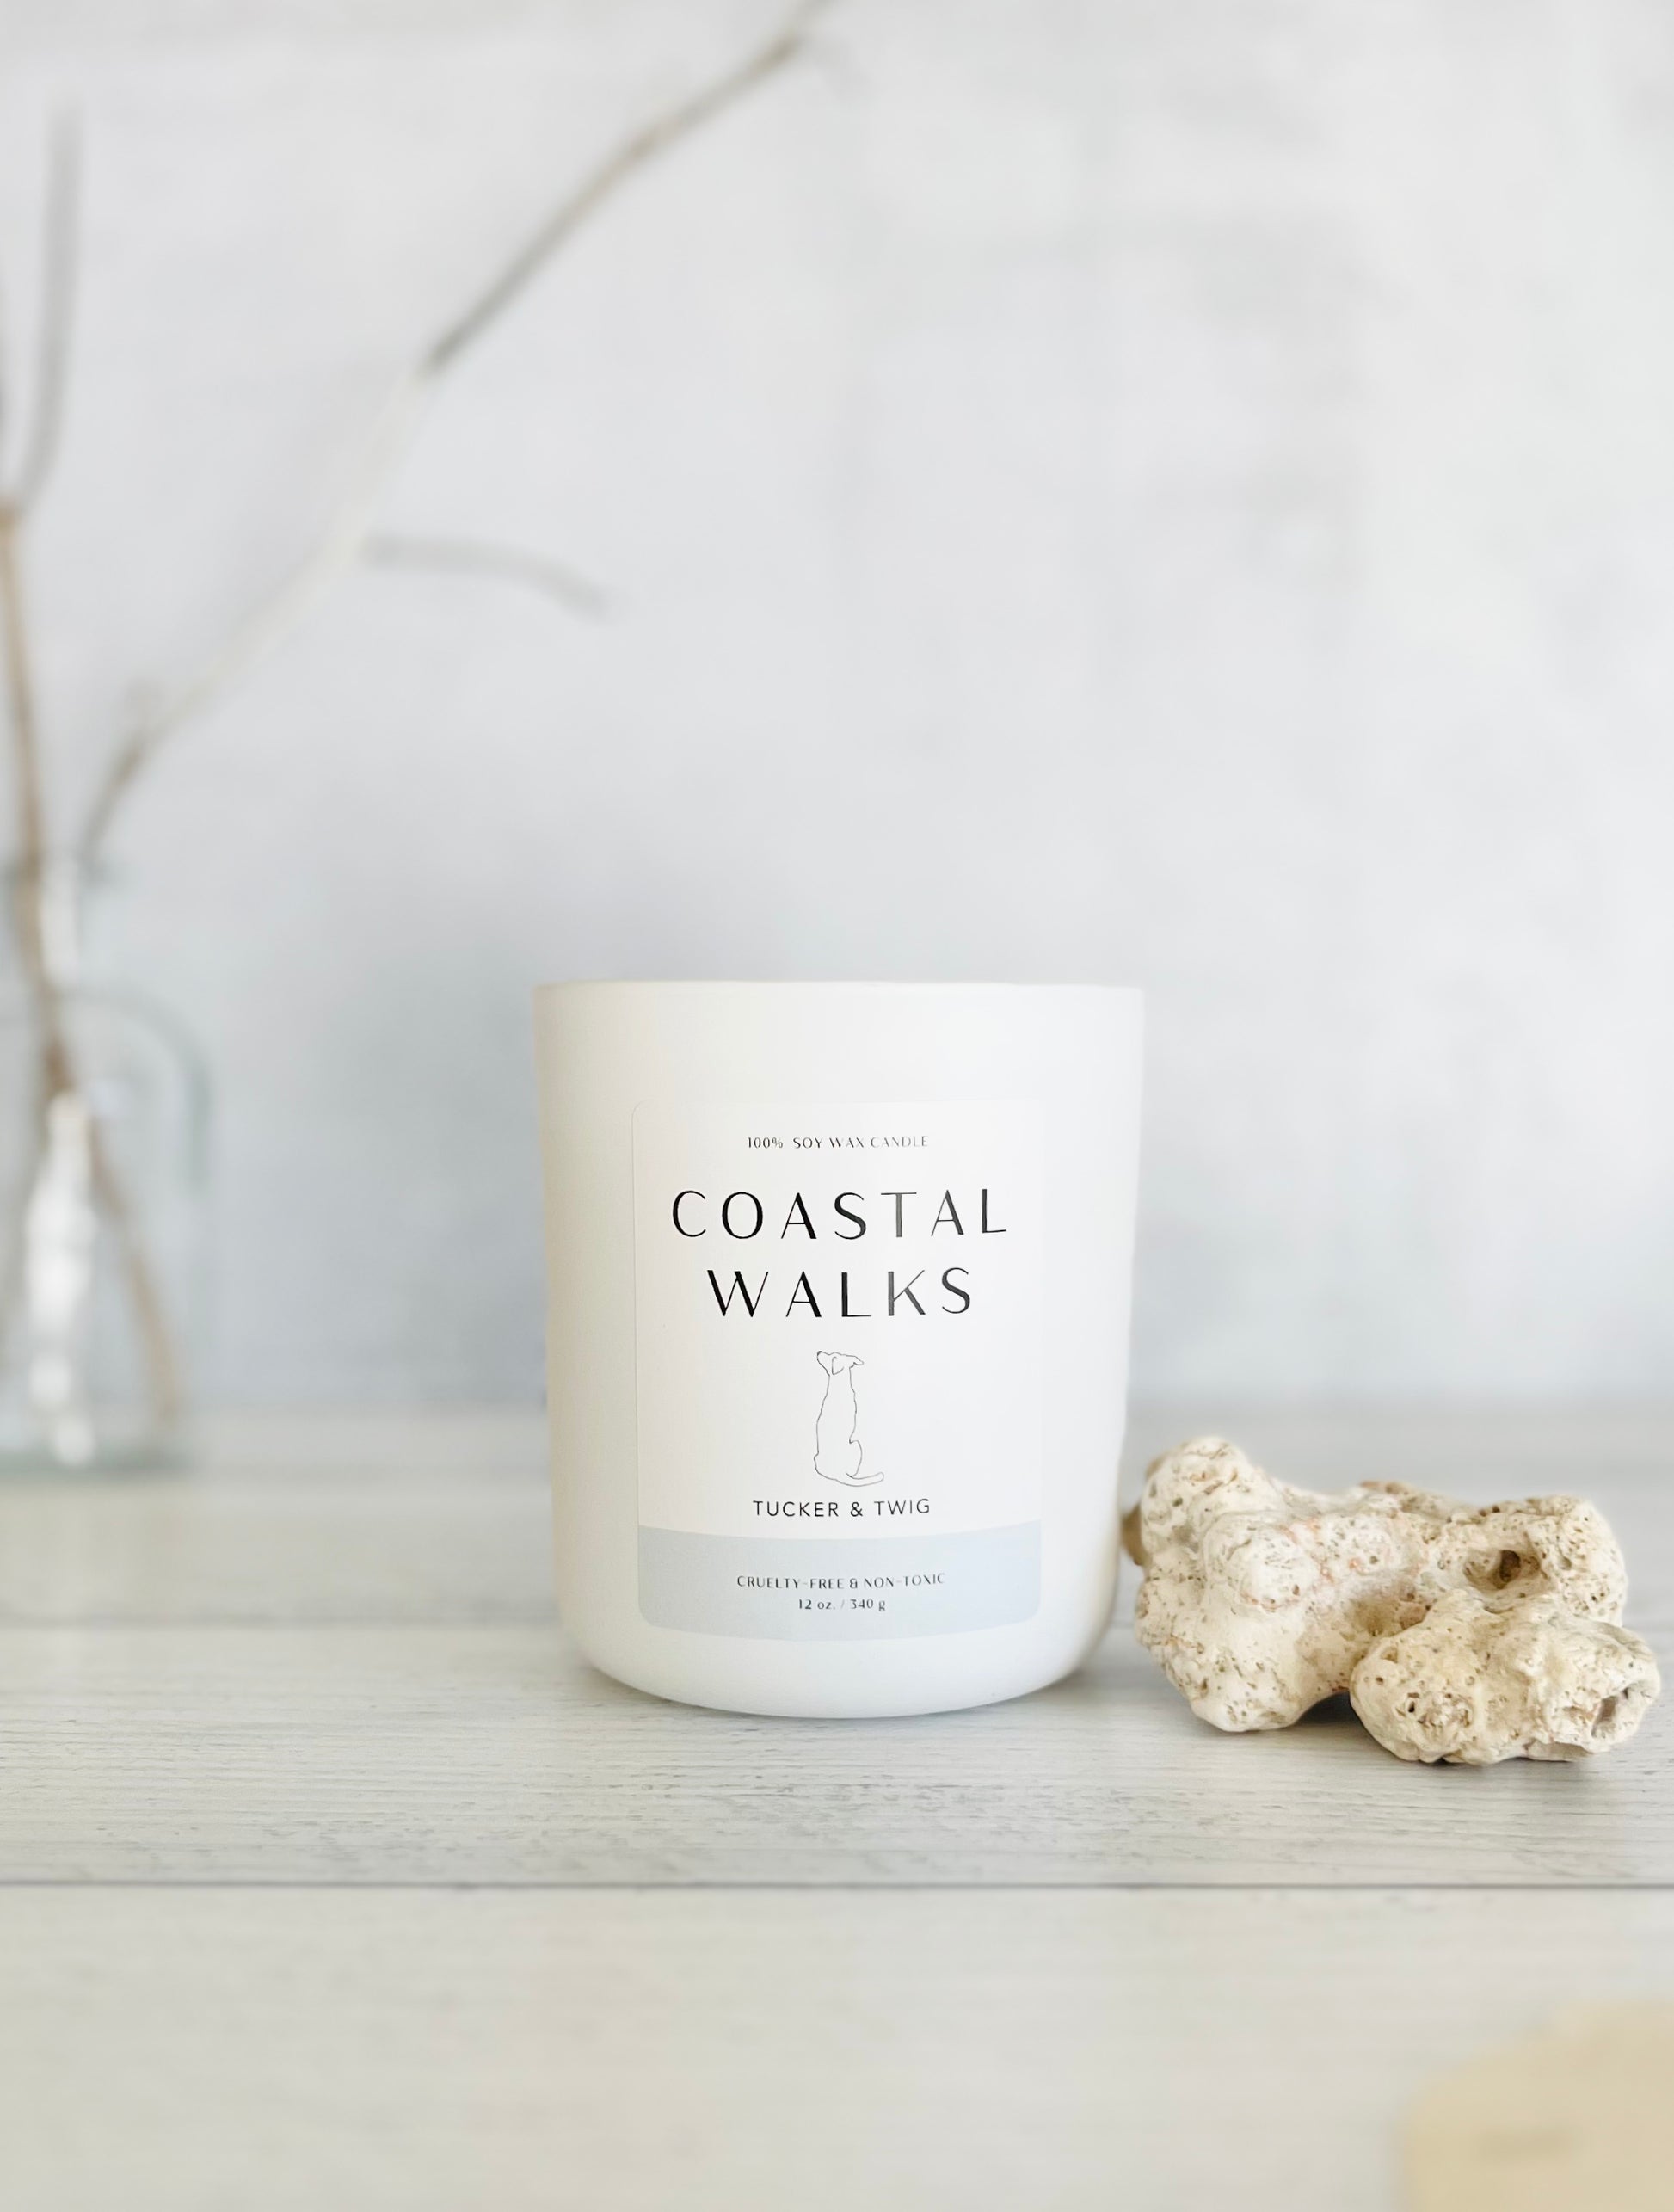 Candle in white glass container, labeled "Coastal Walks" with coral beside it.